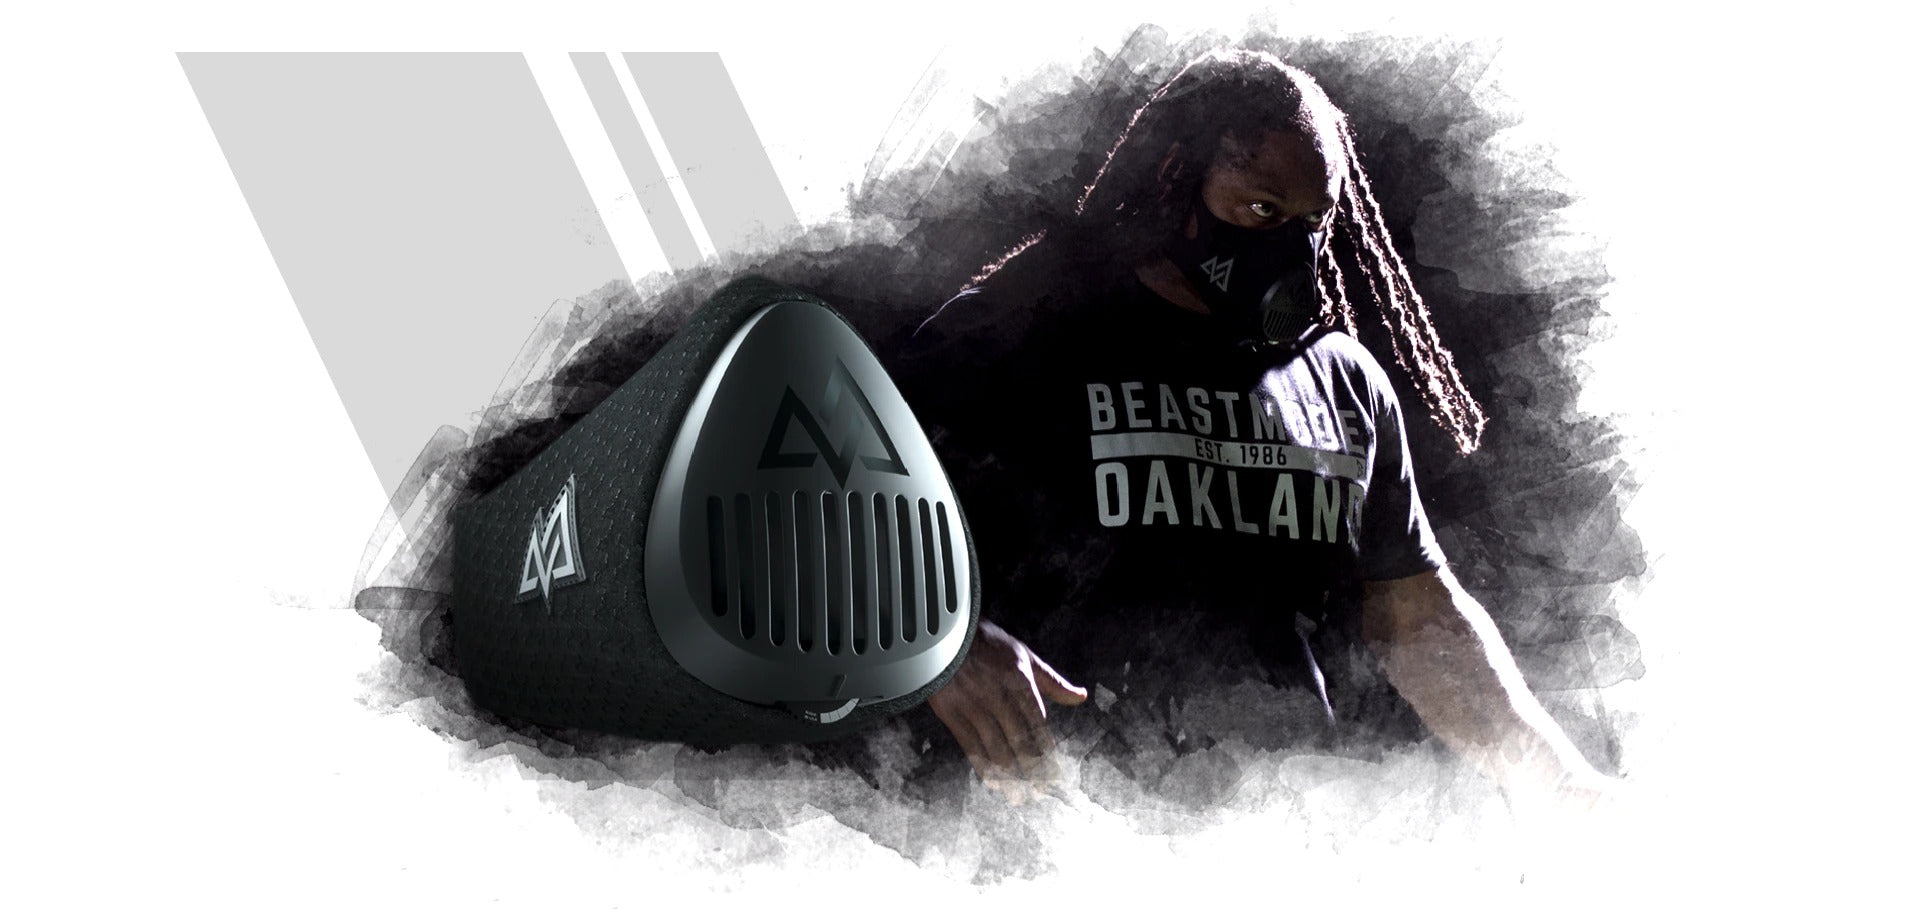 Marshawn Lynch in photo wearing Training Mask 3.0 and Training Mask 3.0 featured on left side